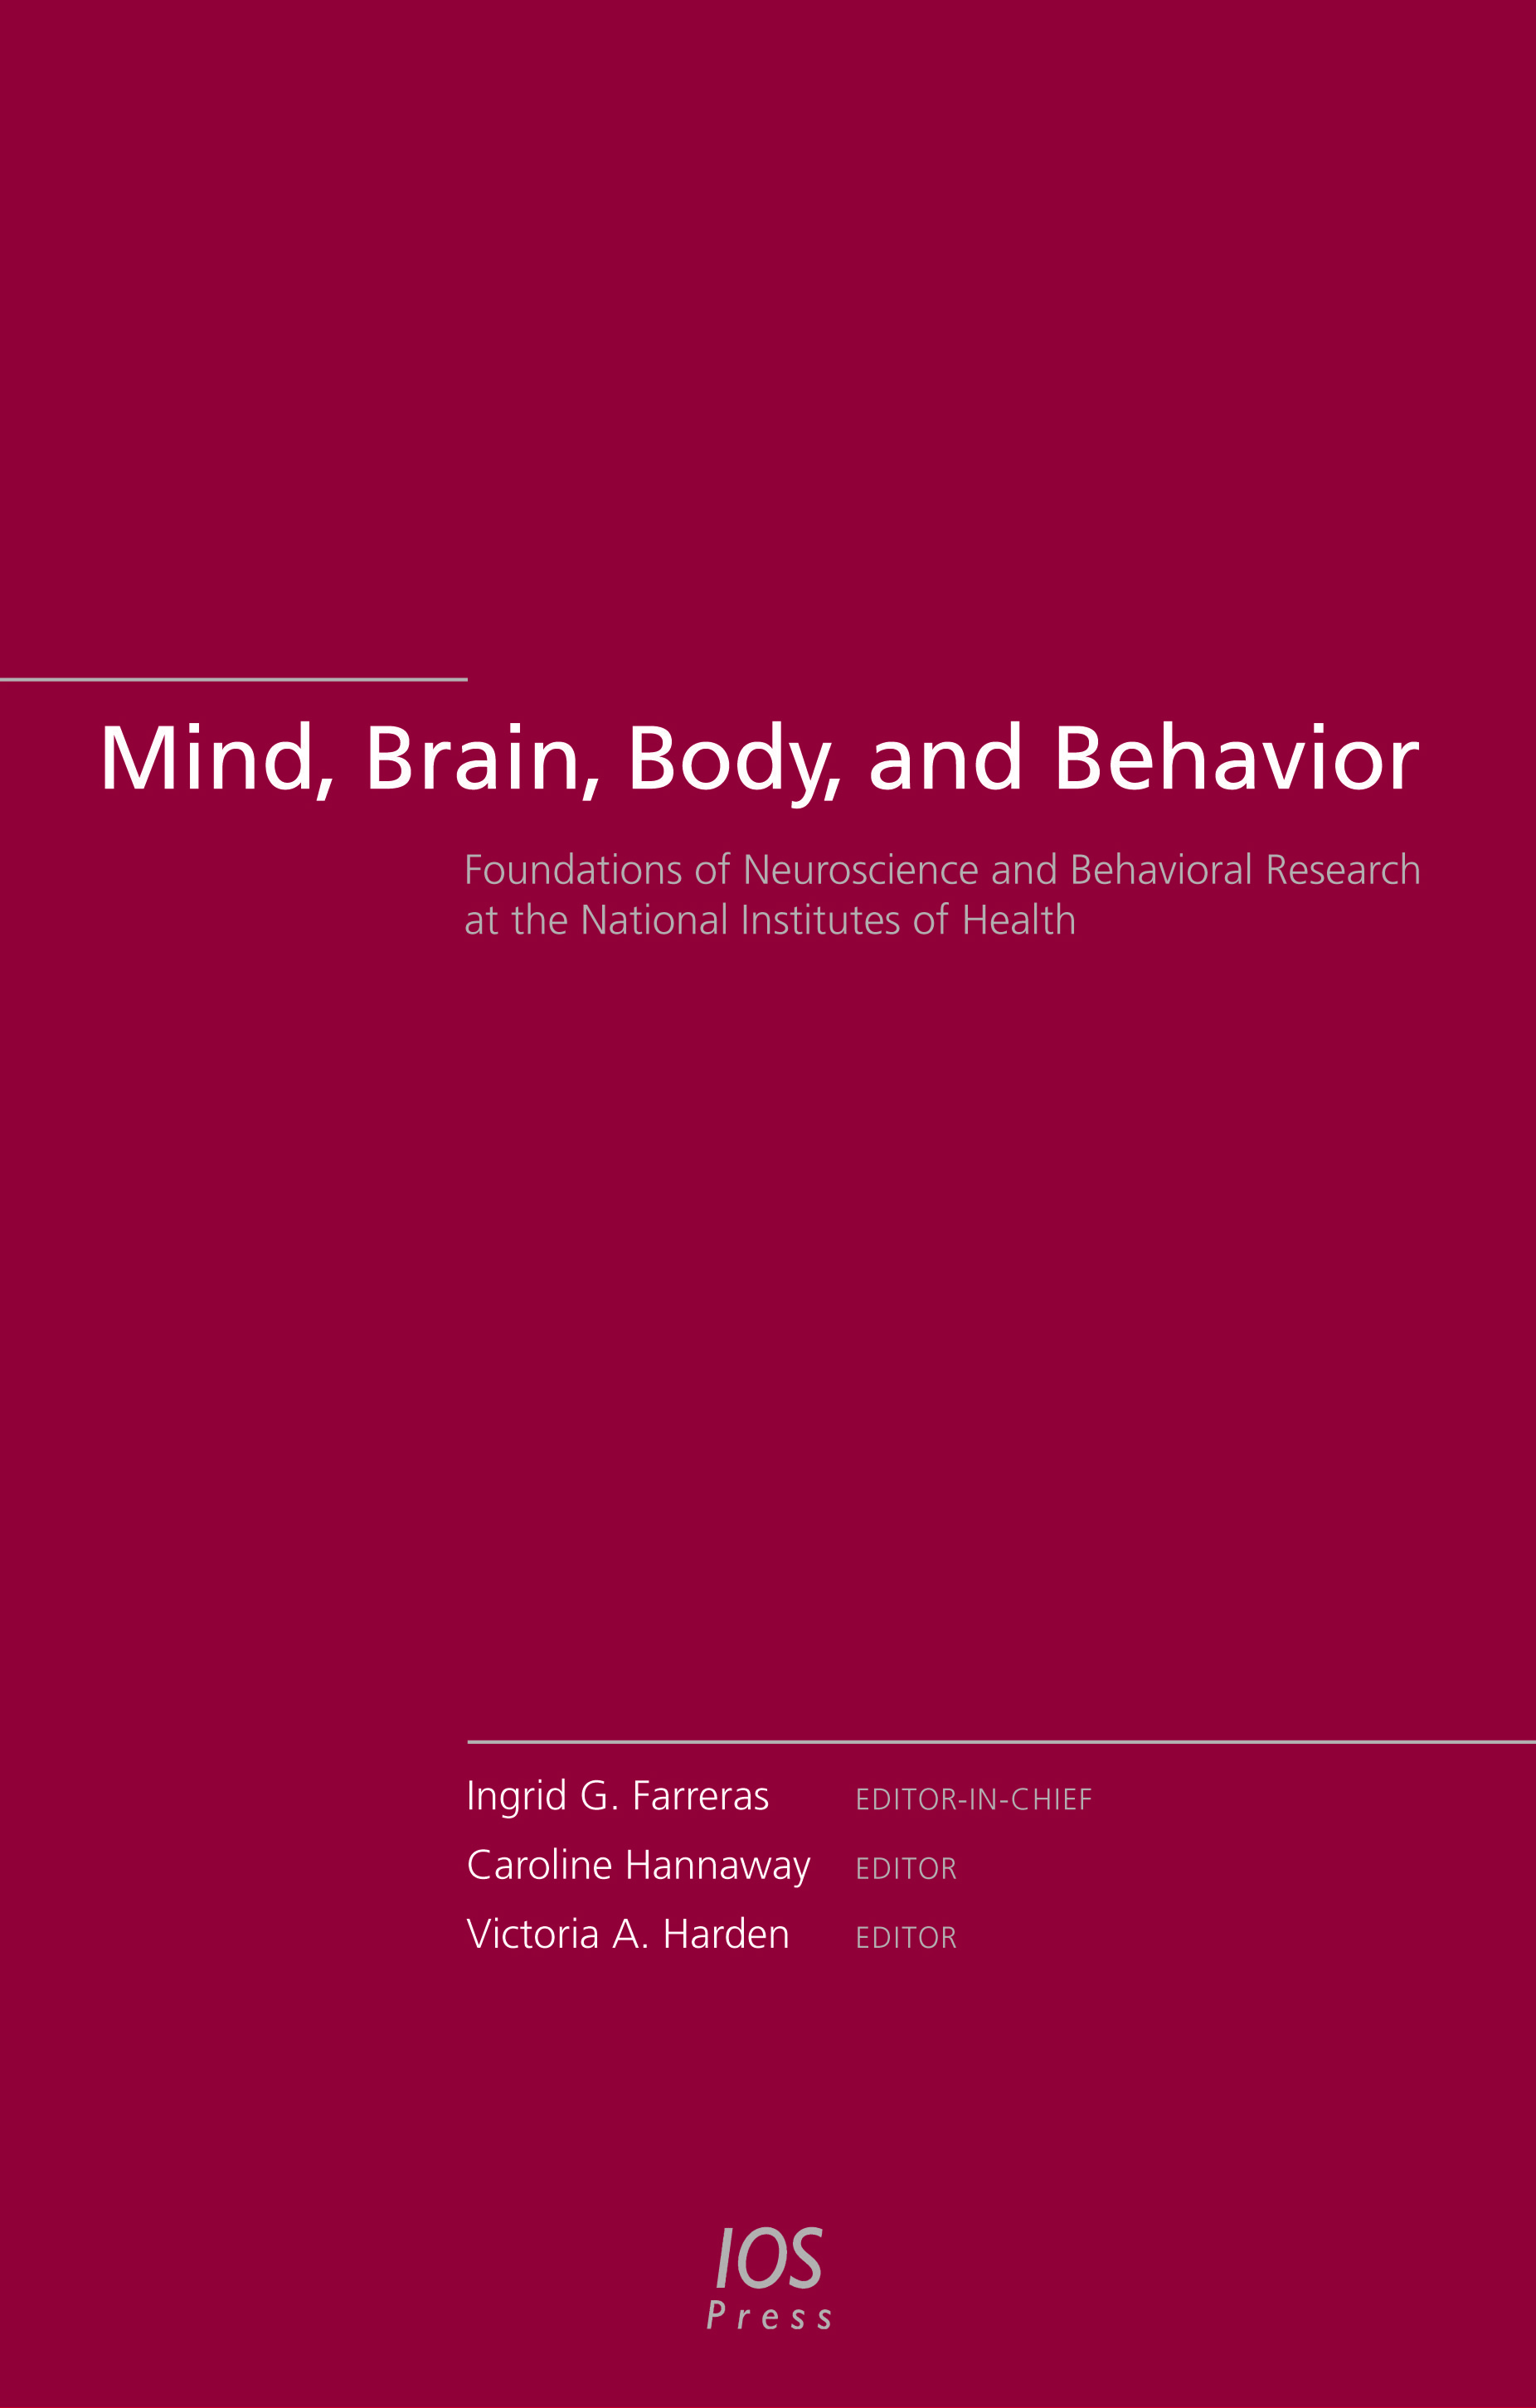 Mind, Brain, Body, and Behavior: Foundations of Neuroscience and Behavioral Research at the National Institutes of Health